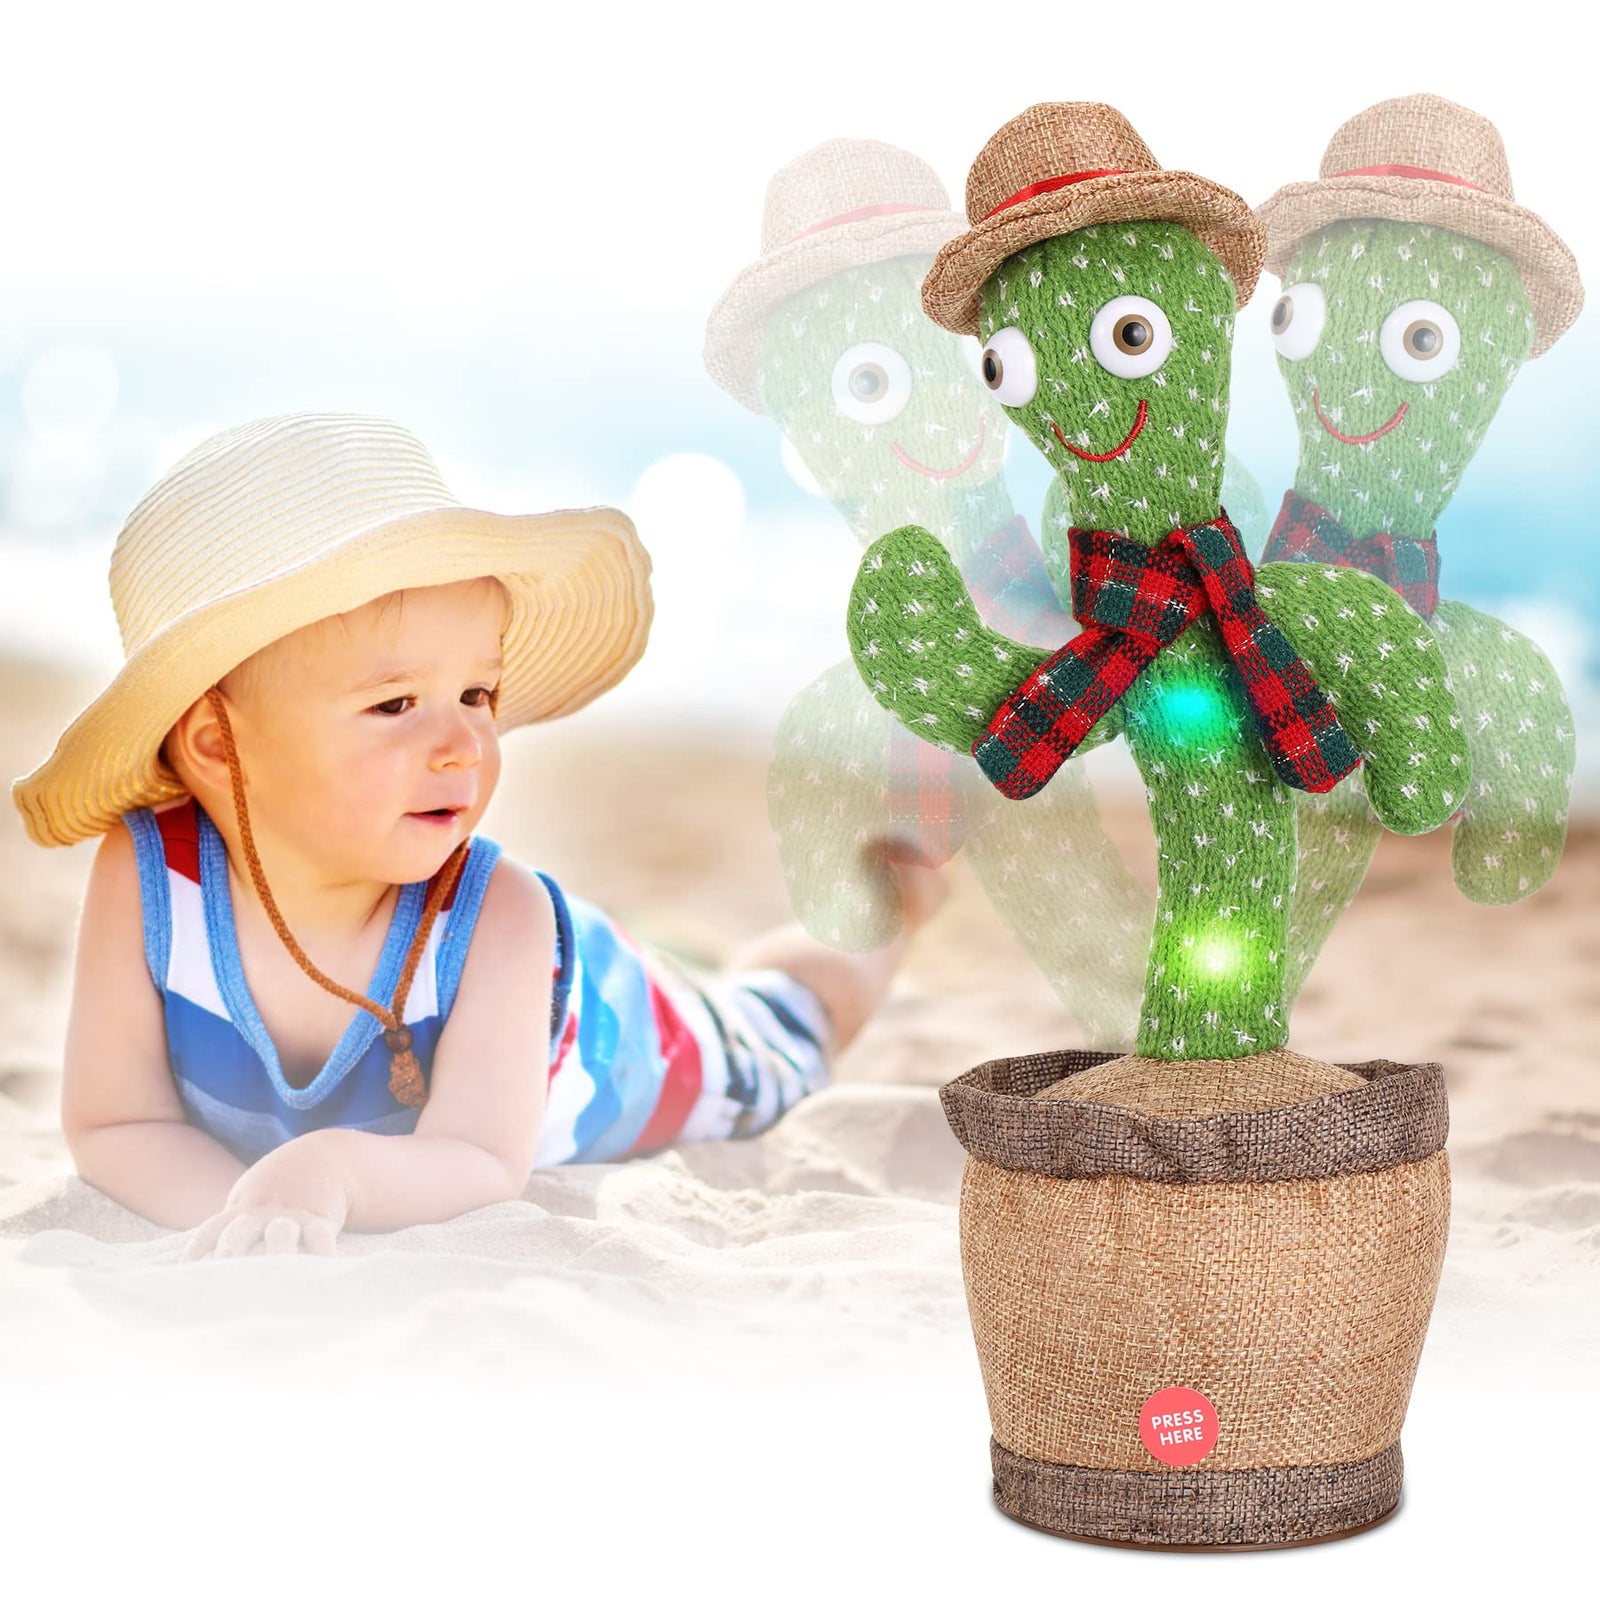 MIAODAM Volume Adjustable Dancing Cactus, Colorful Glowing Talking Cactus Toy, Repeating What You Say Cactus Toys Singing 120 Songs Cactus Plush Eletronic Baby Toys Funny Creative Kids Toy